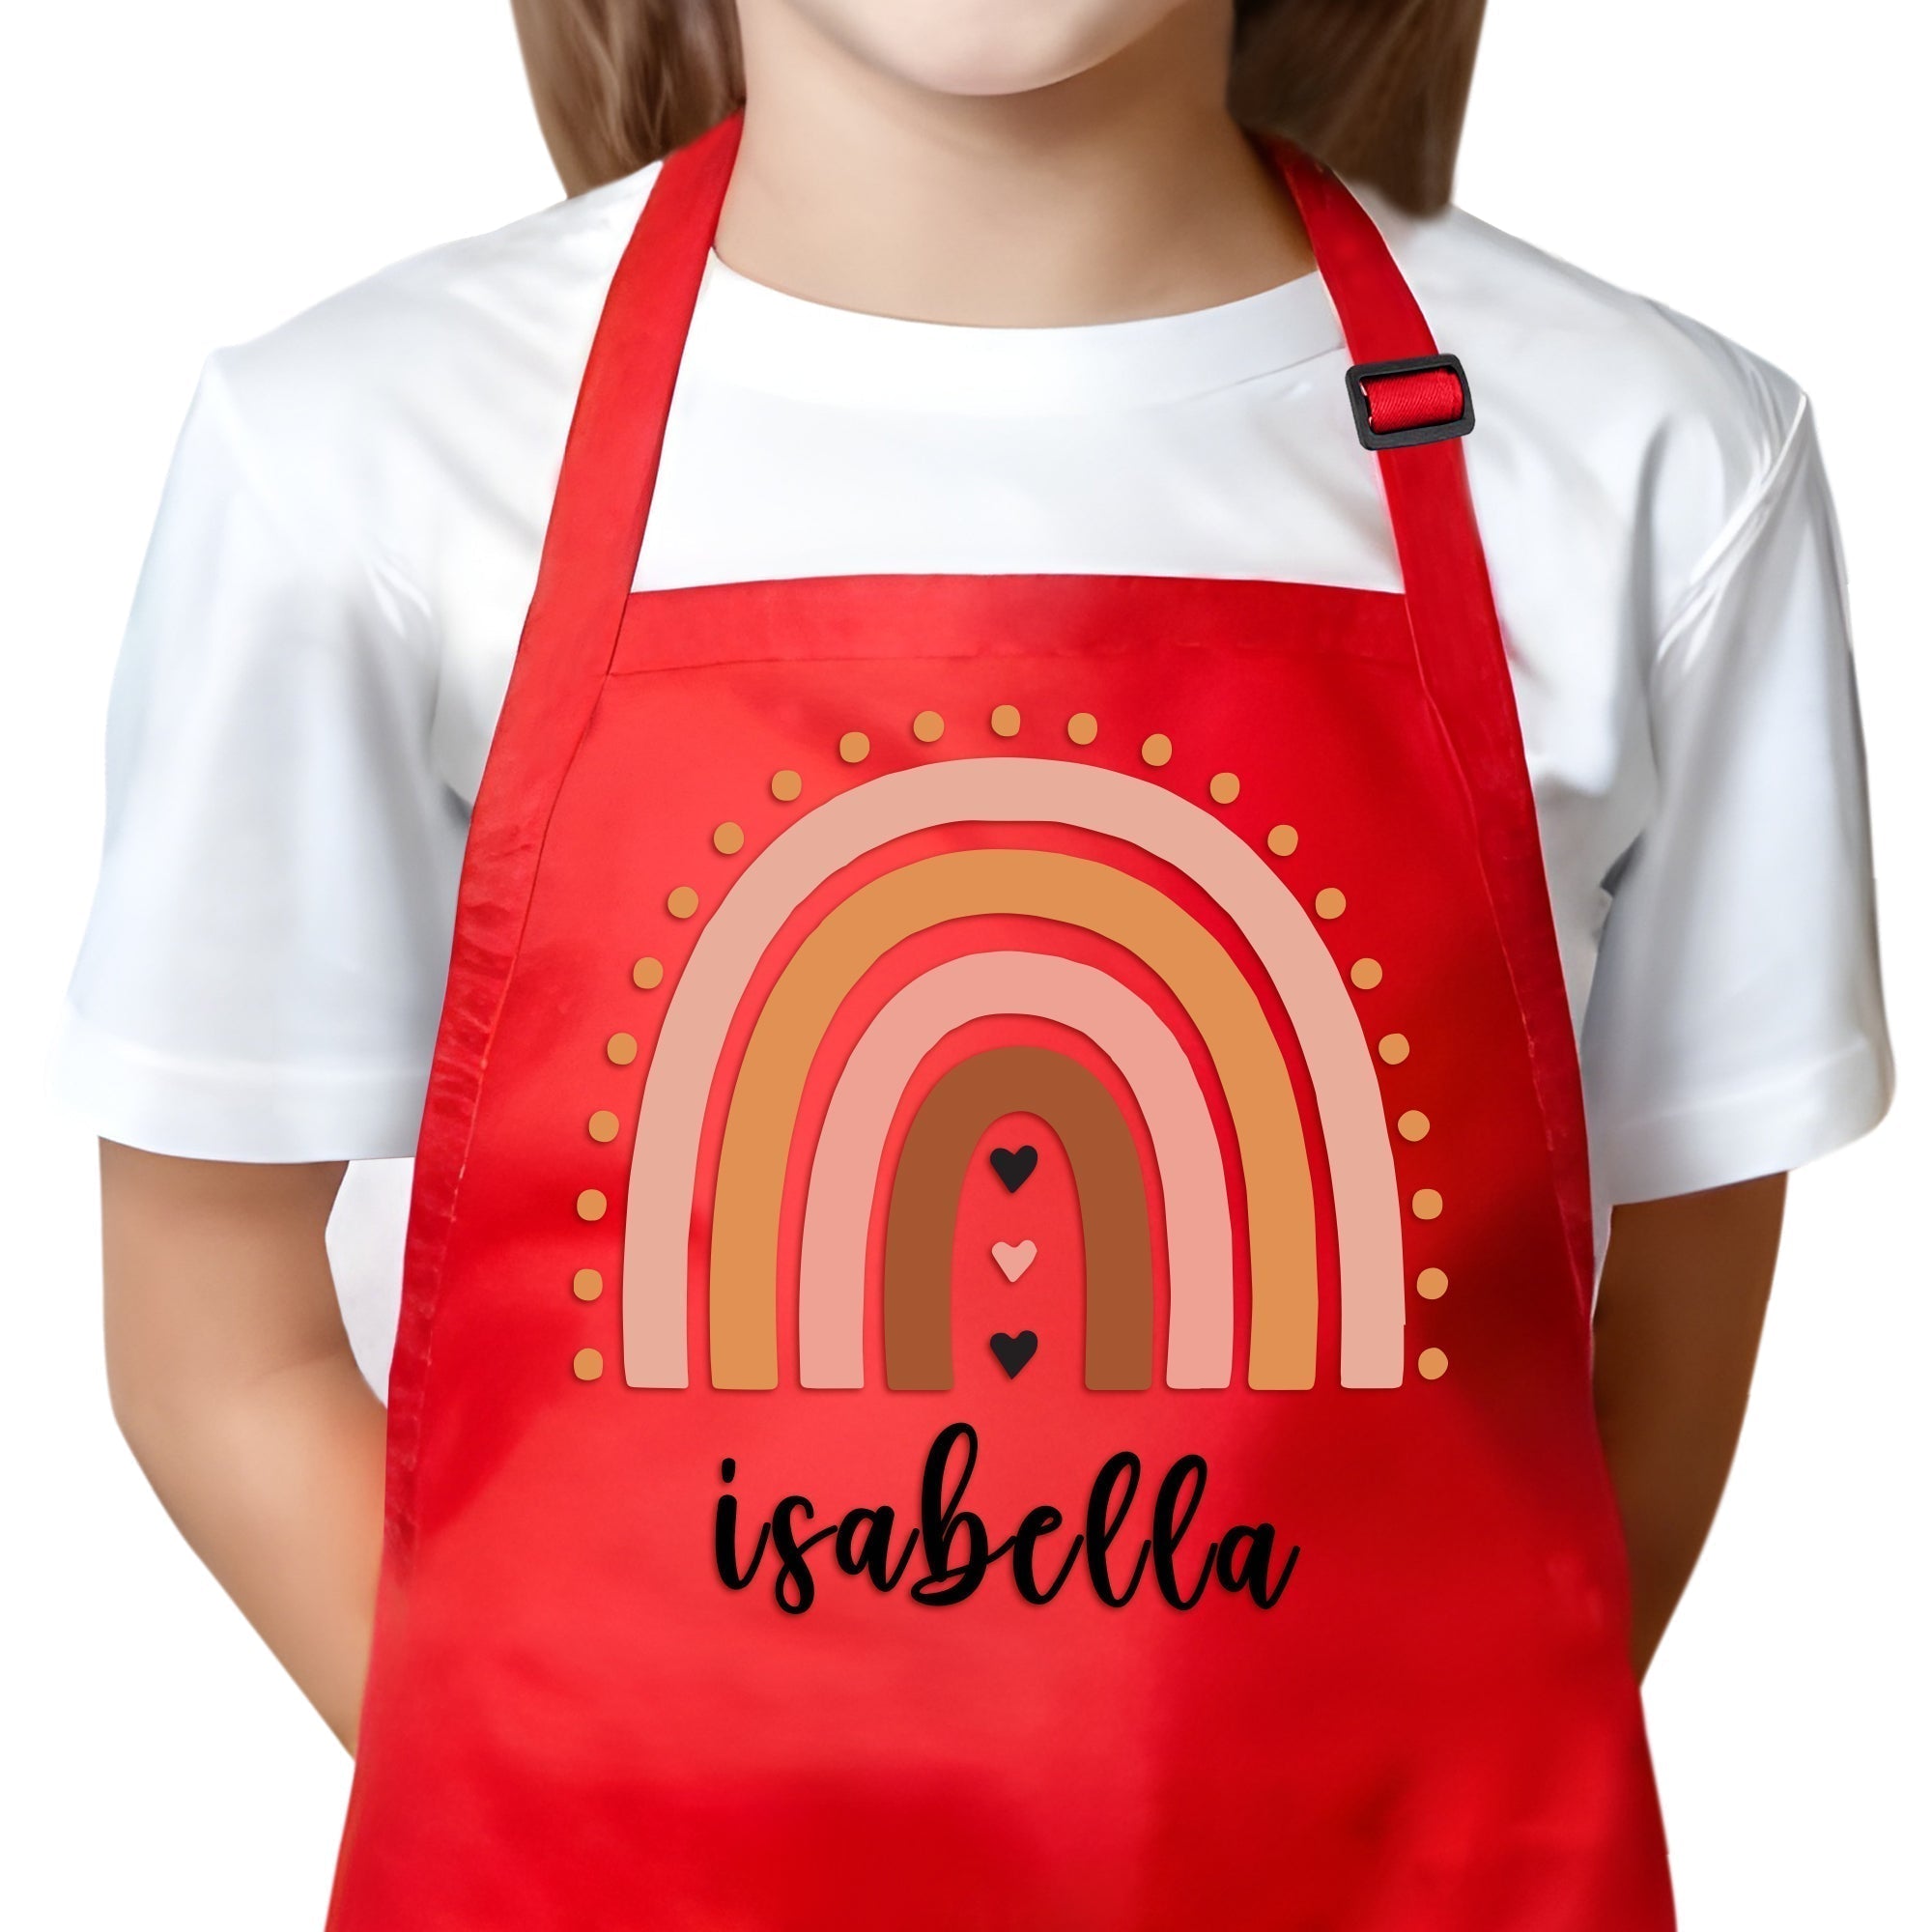 Personalized Kids Red Apron Rainbow BOHO Design with Custom Name - Custom Children's Cooking Little Helper Kitchen Apron - Unisex Baking Red Apron for Boys and Girls